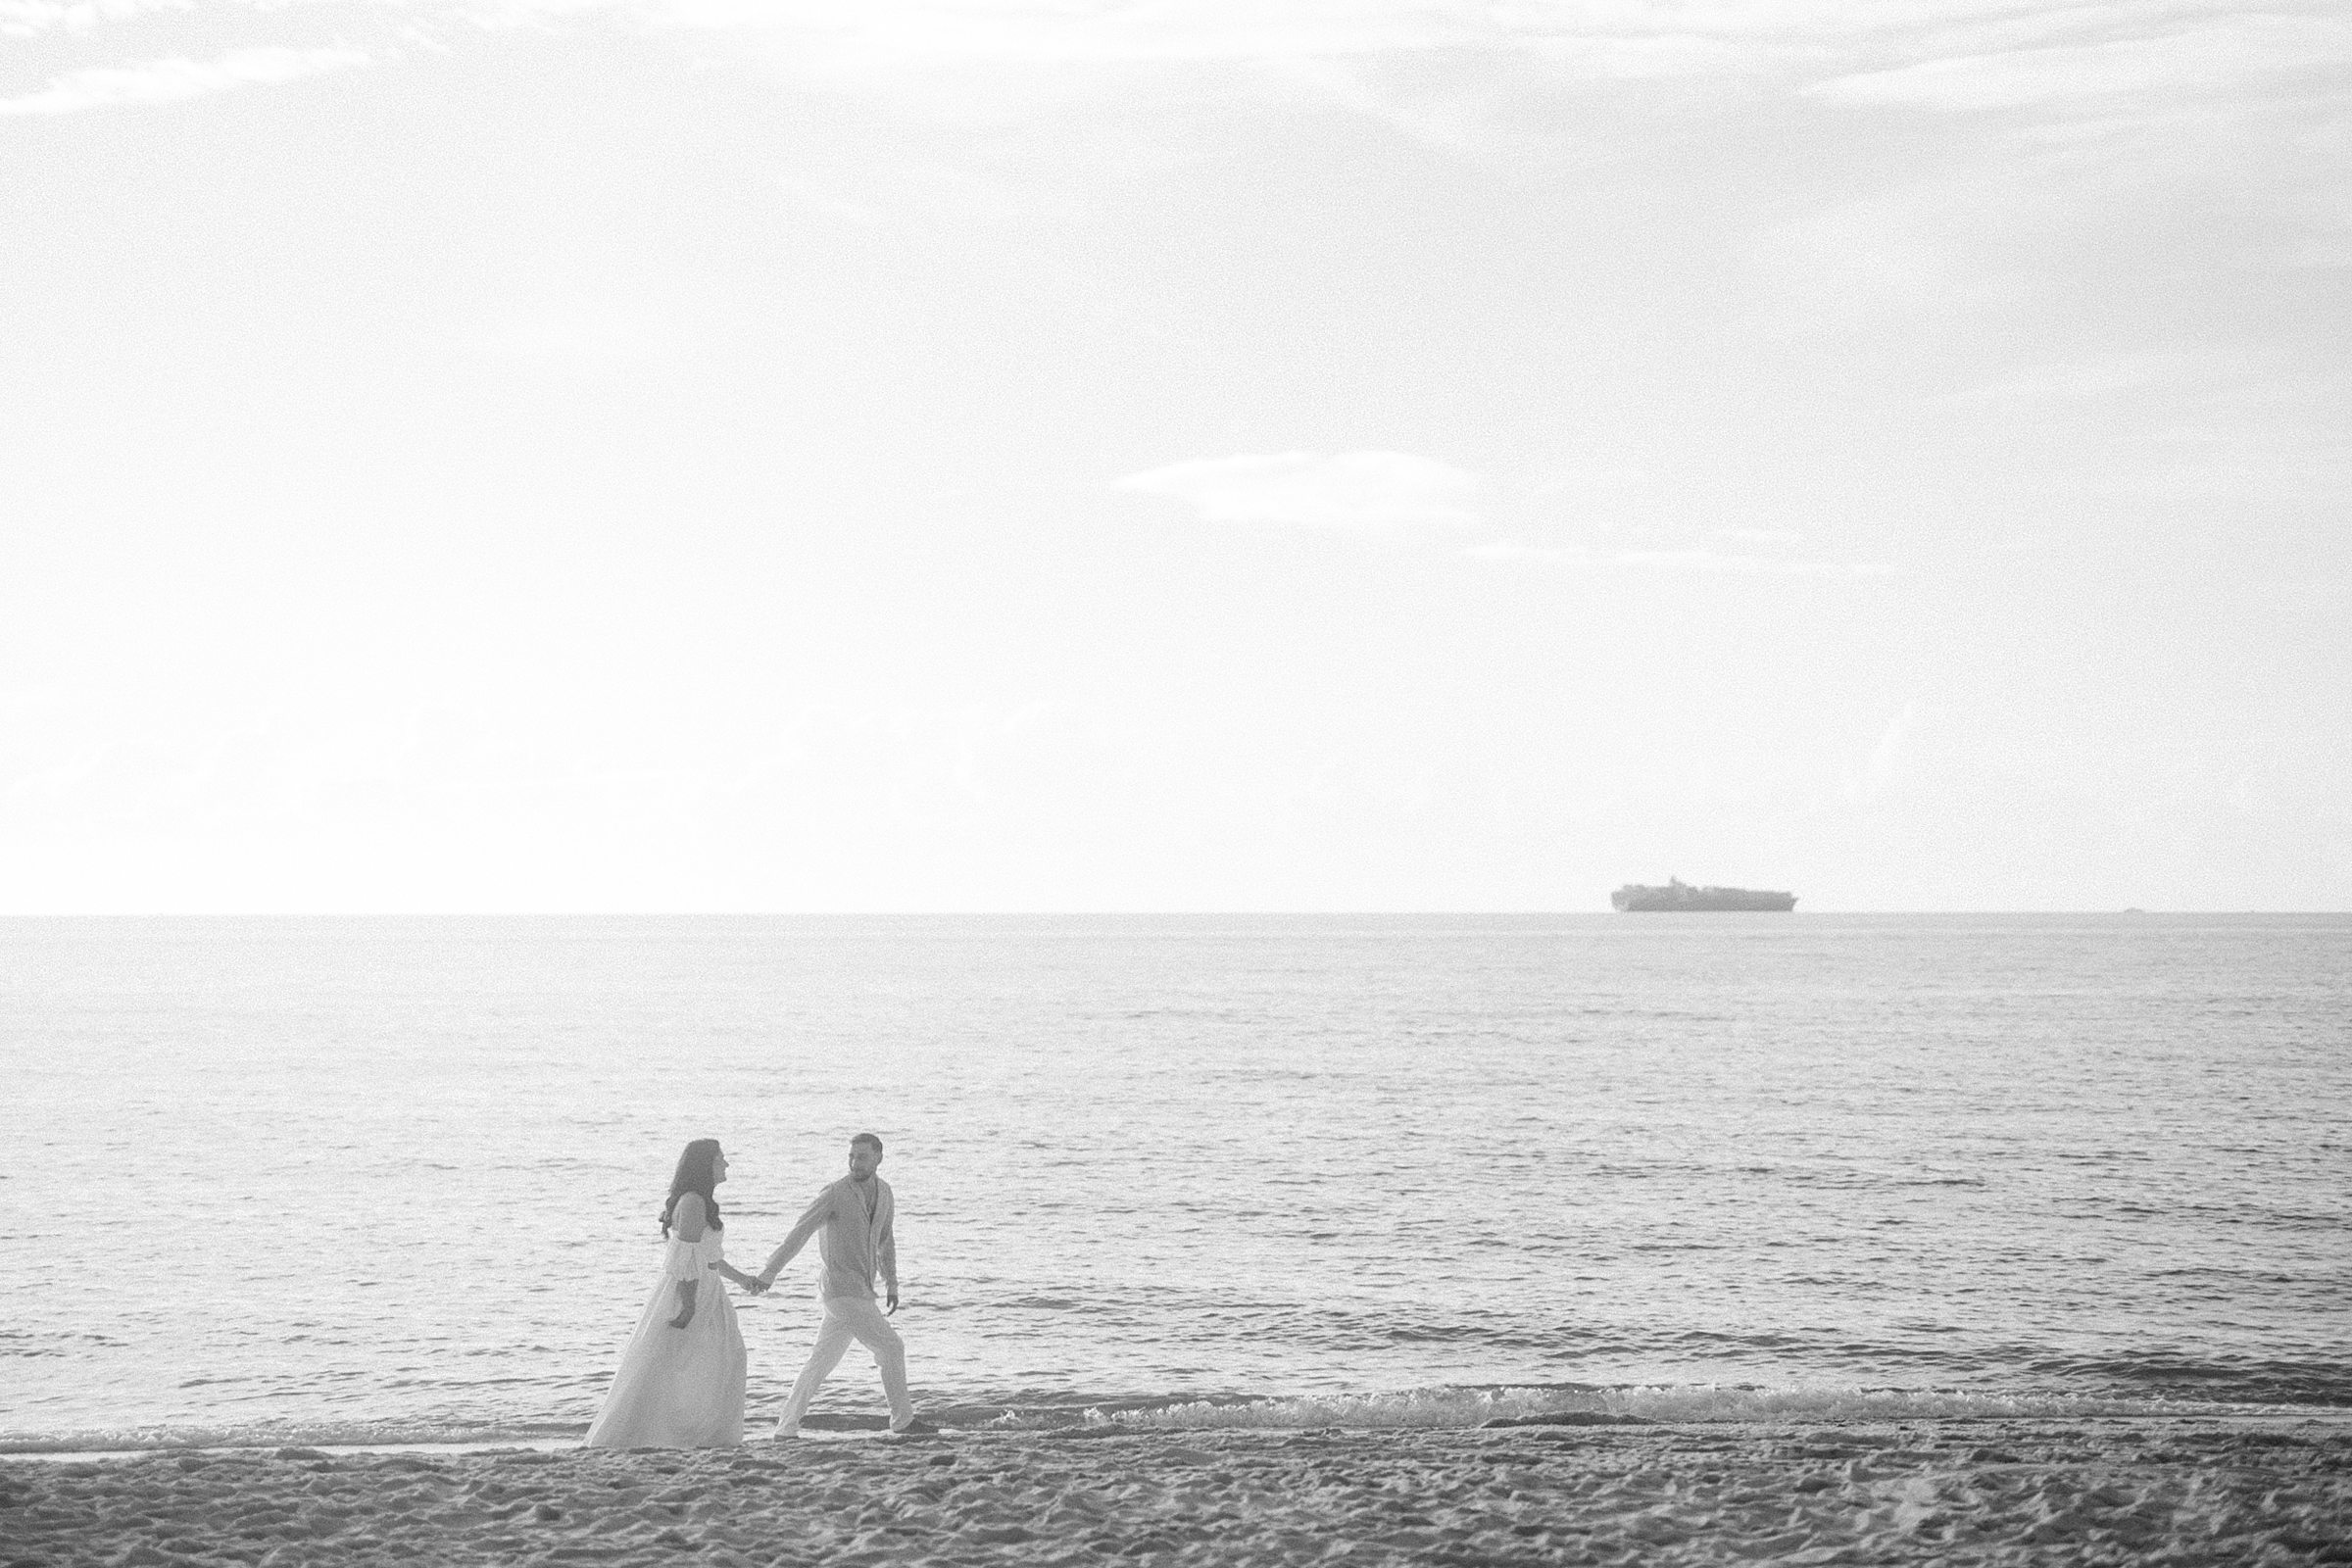 Black and white image of a couple walking down the beach with a cruise ship in the fair distance